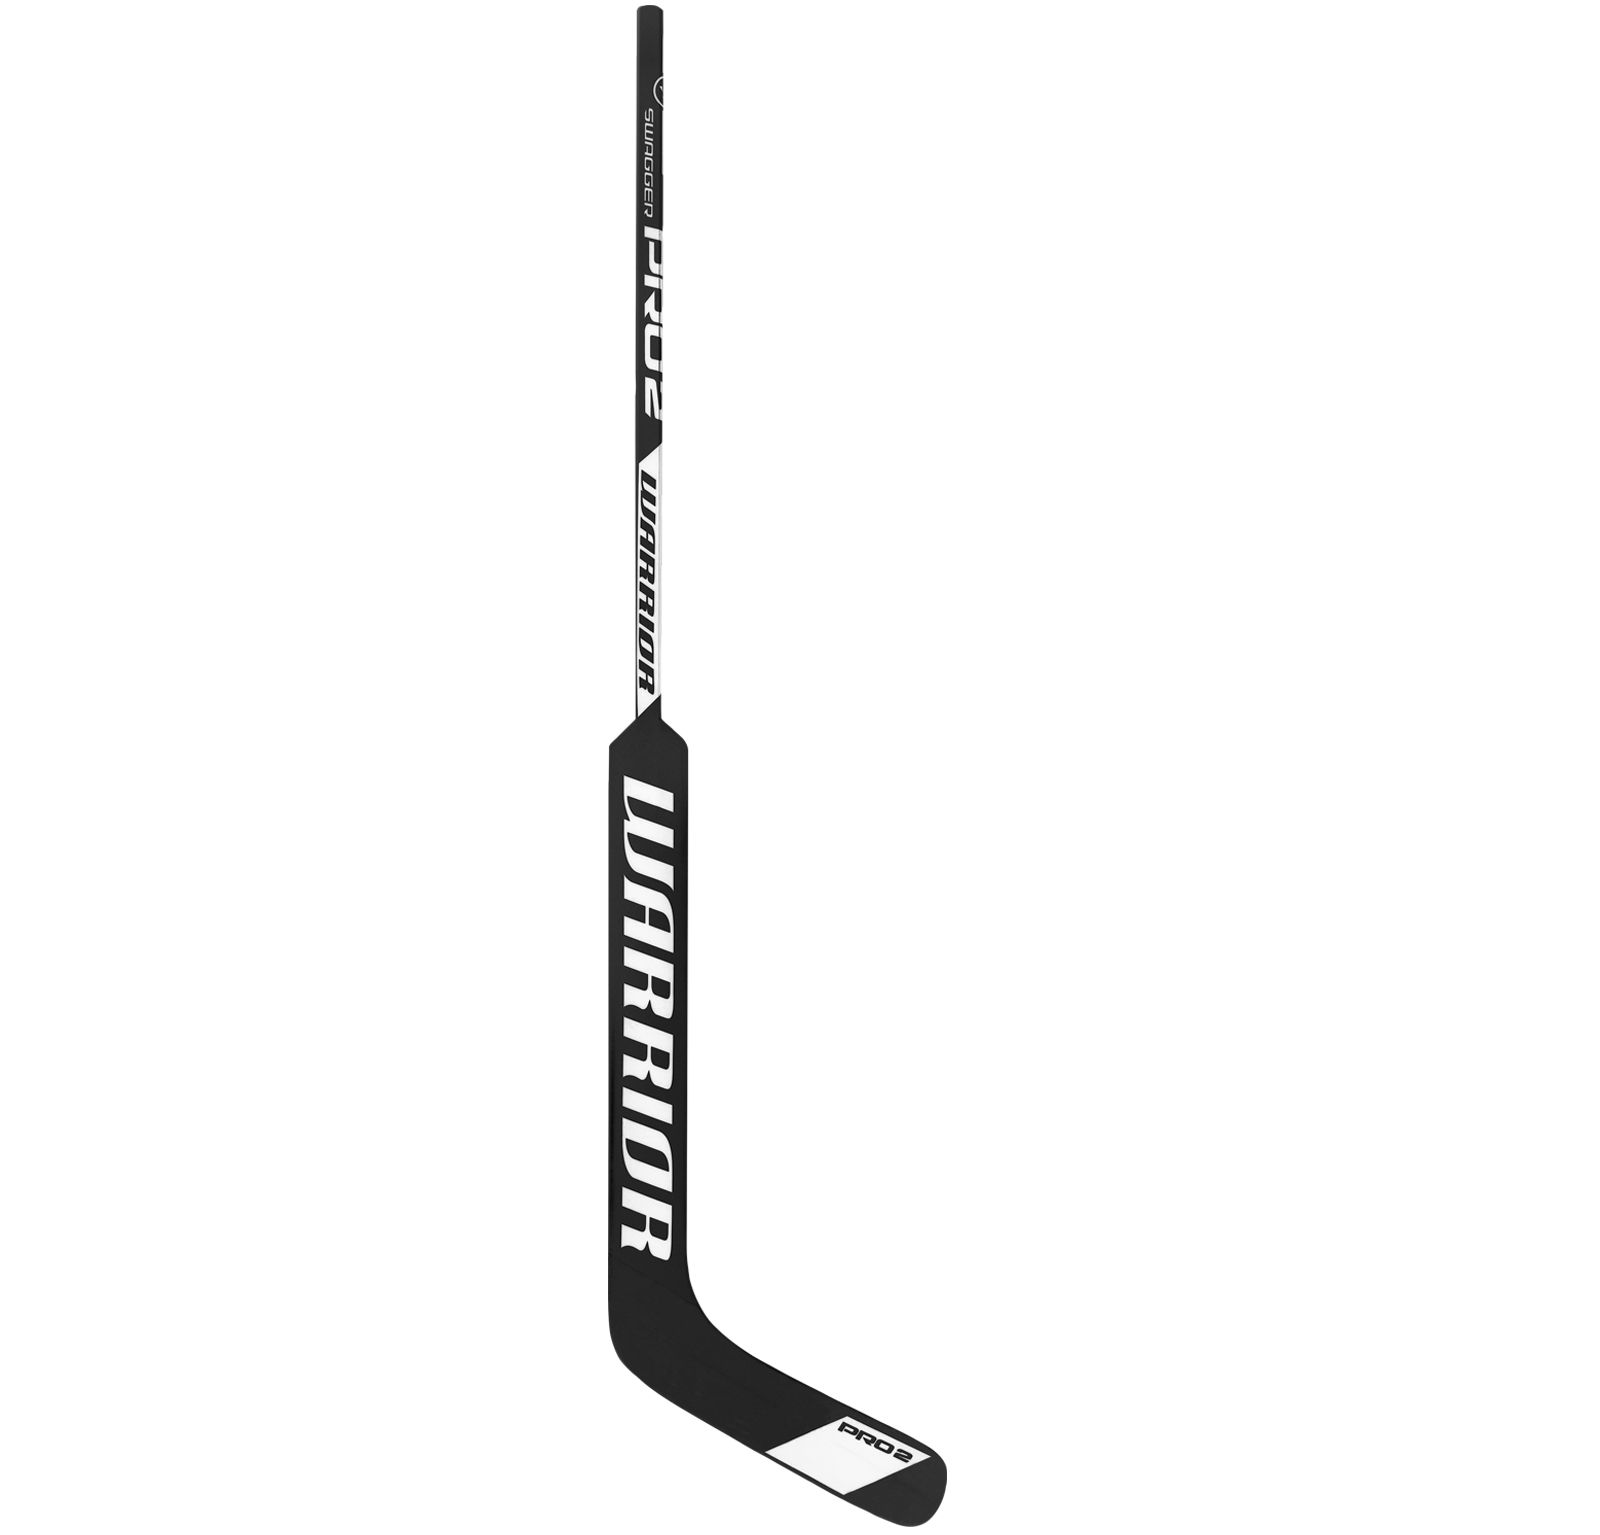 Swagger Pro 2 - JR Left, Black with White image number 0